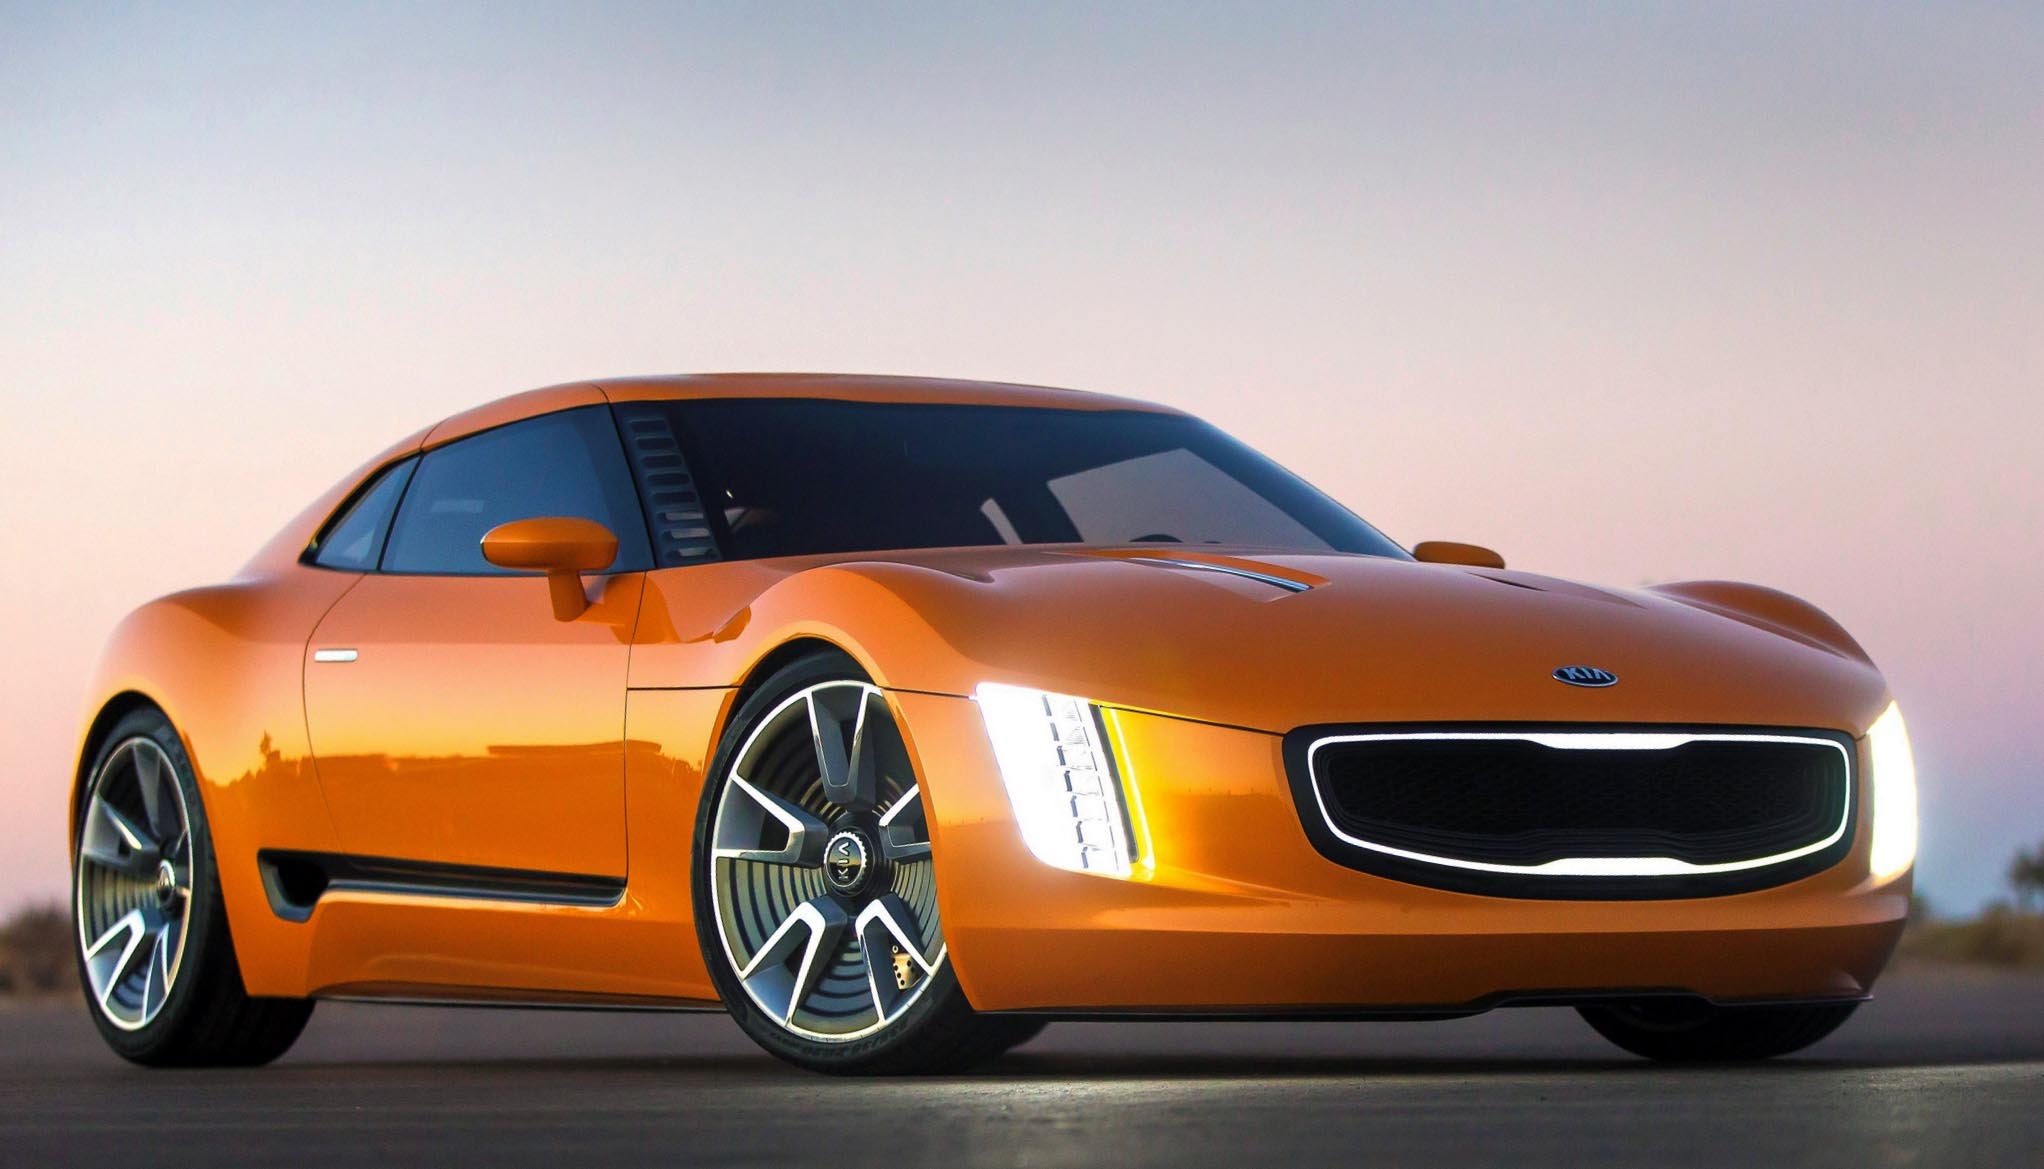 Kia receives IDEA Silver for the sleekly sculpted GT4 Stinger co